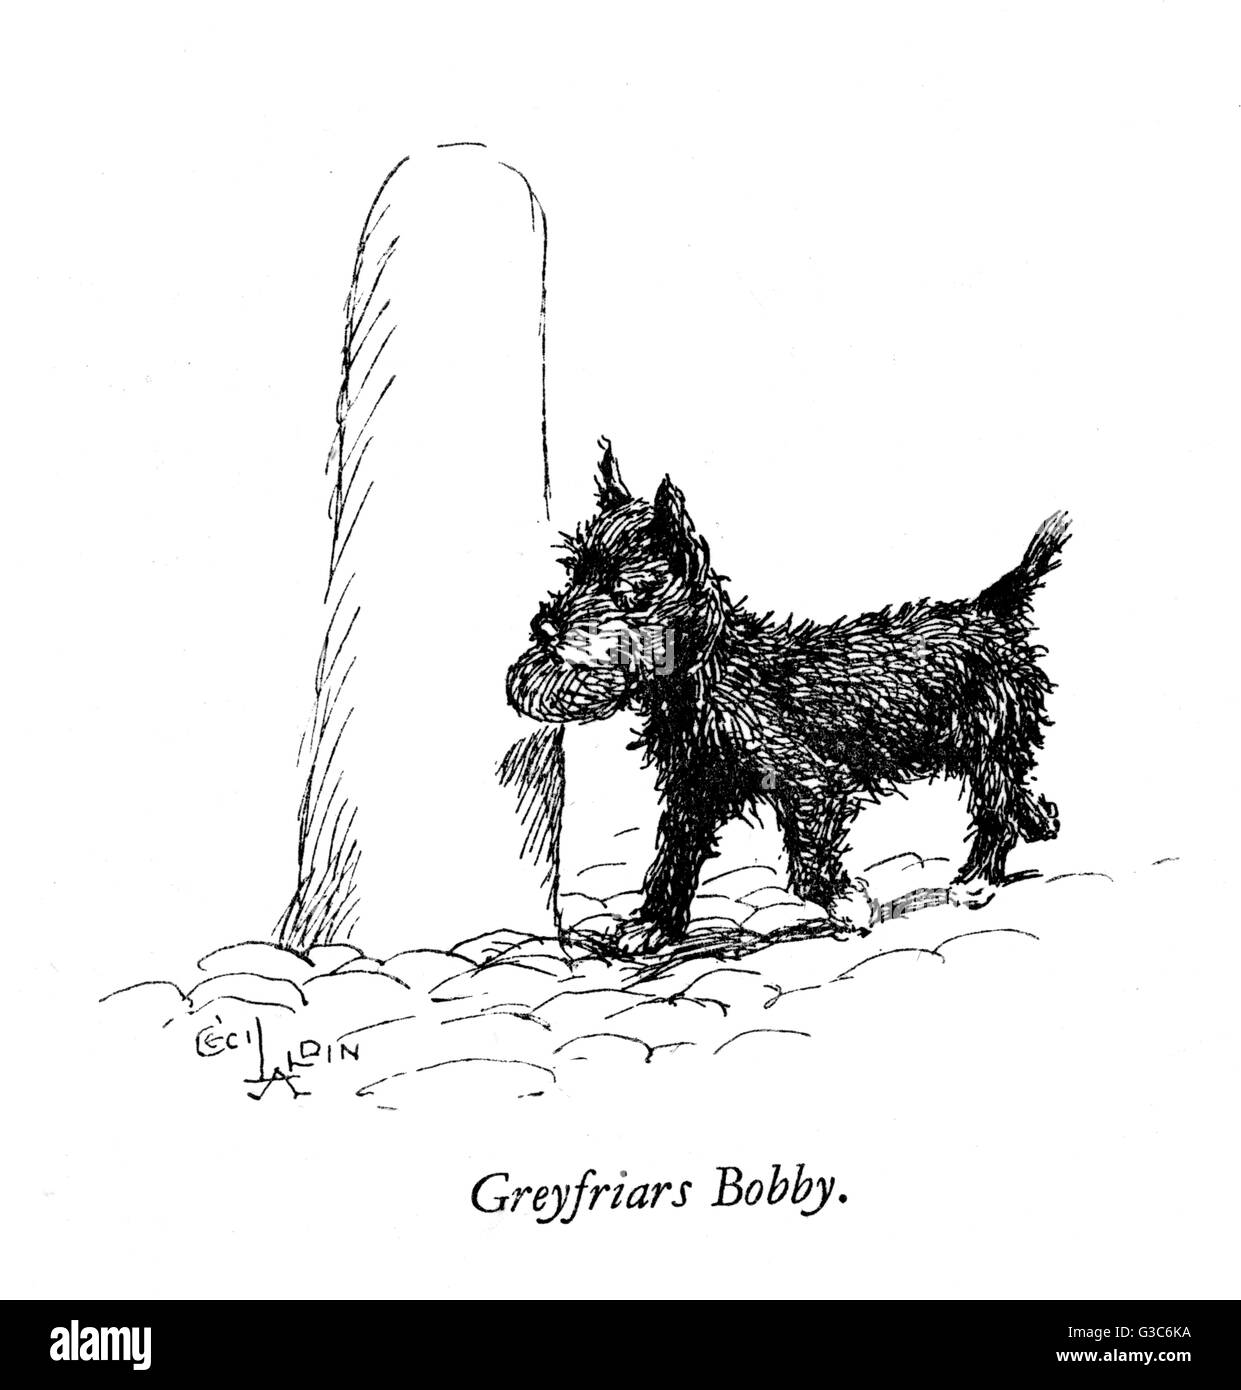 Illustration of Greyfriars Bobby by Cecil Aldin -- the faithful terrier who visited the Edinburgh grave of his master, a farmer named John Gray, for nine years until he died in 1872.       Date: 1932 Stock Photo